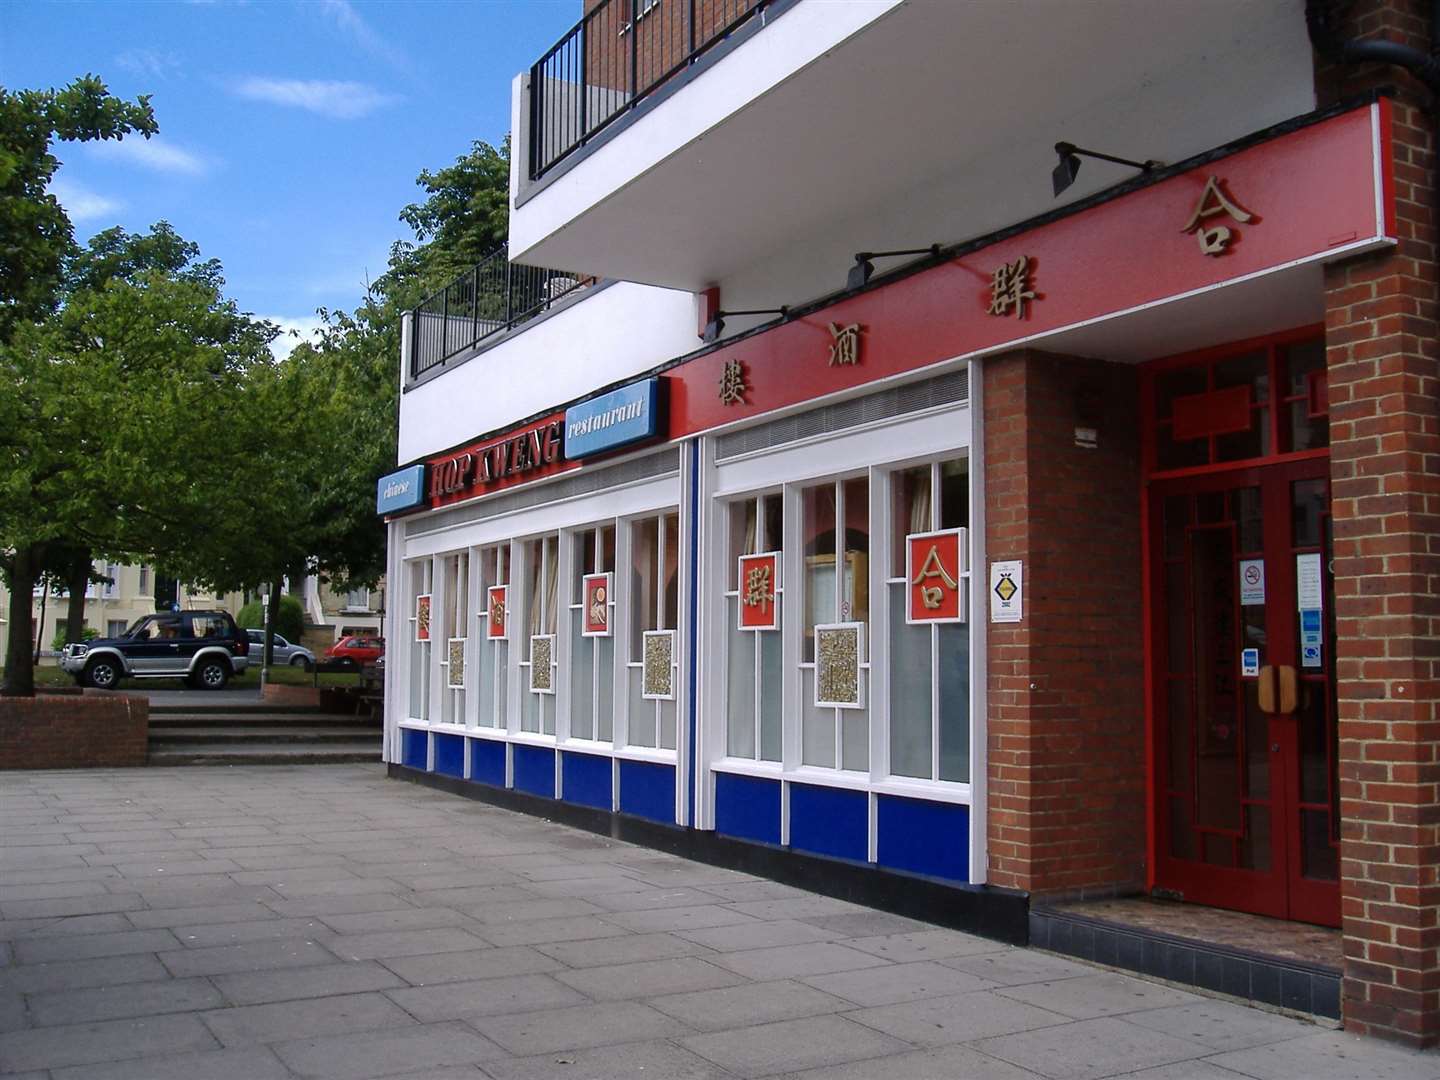 Hop Kweng in Folkestone is closing permanently after 49 years in the town. Picture: Wai Chiang